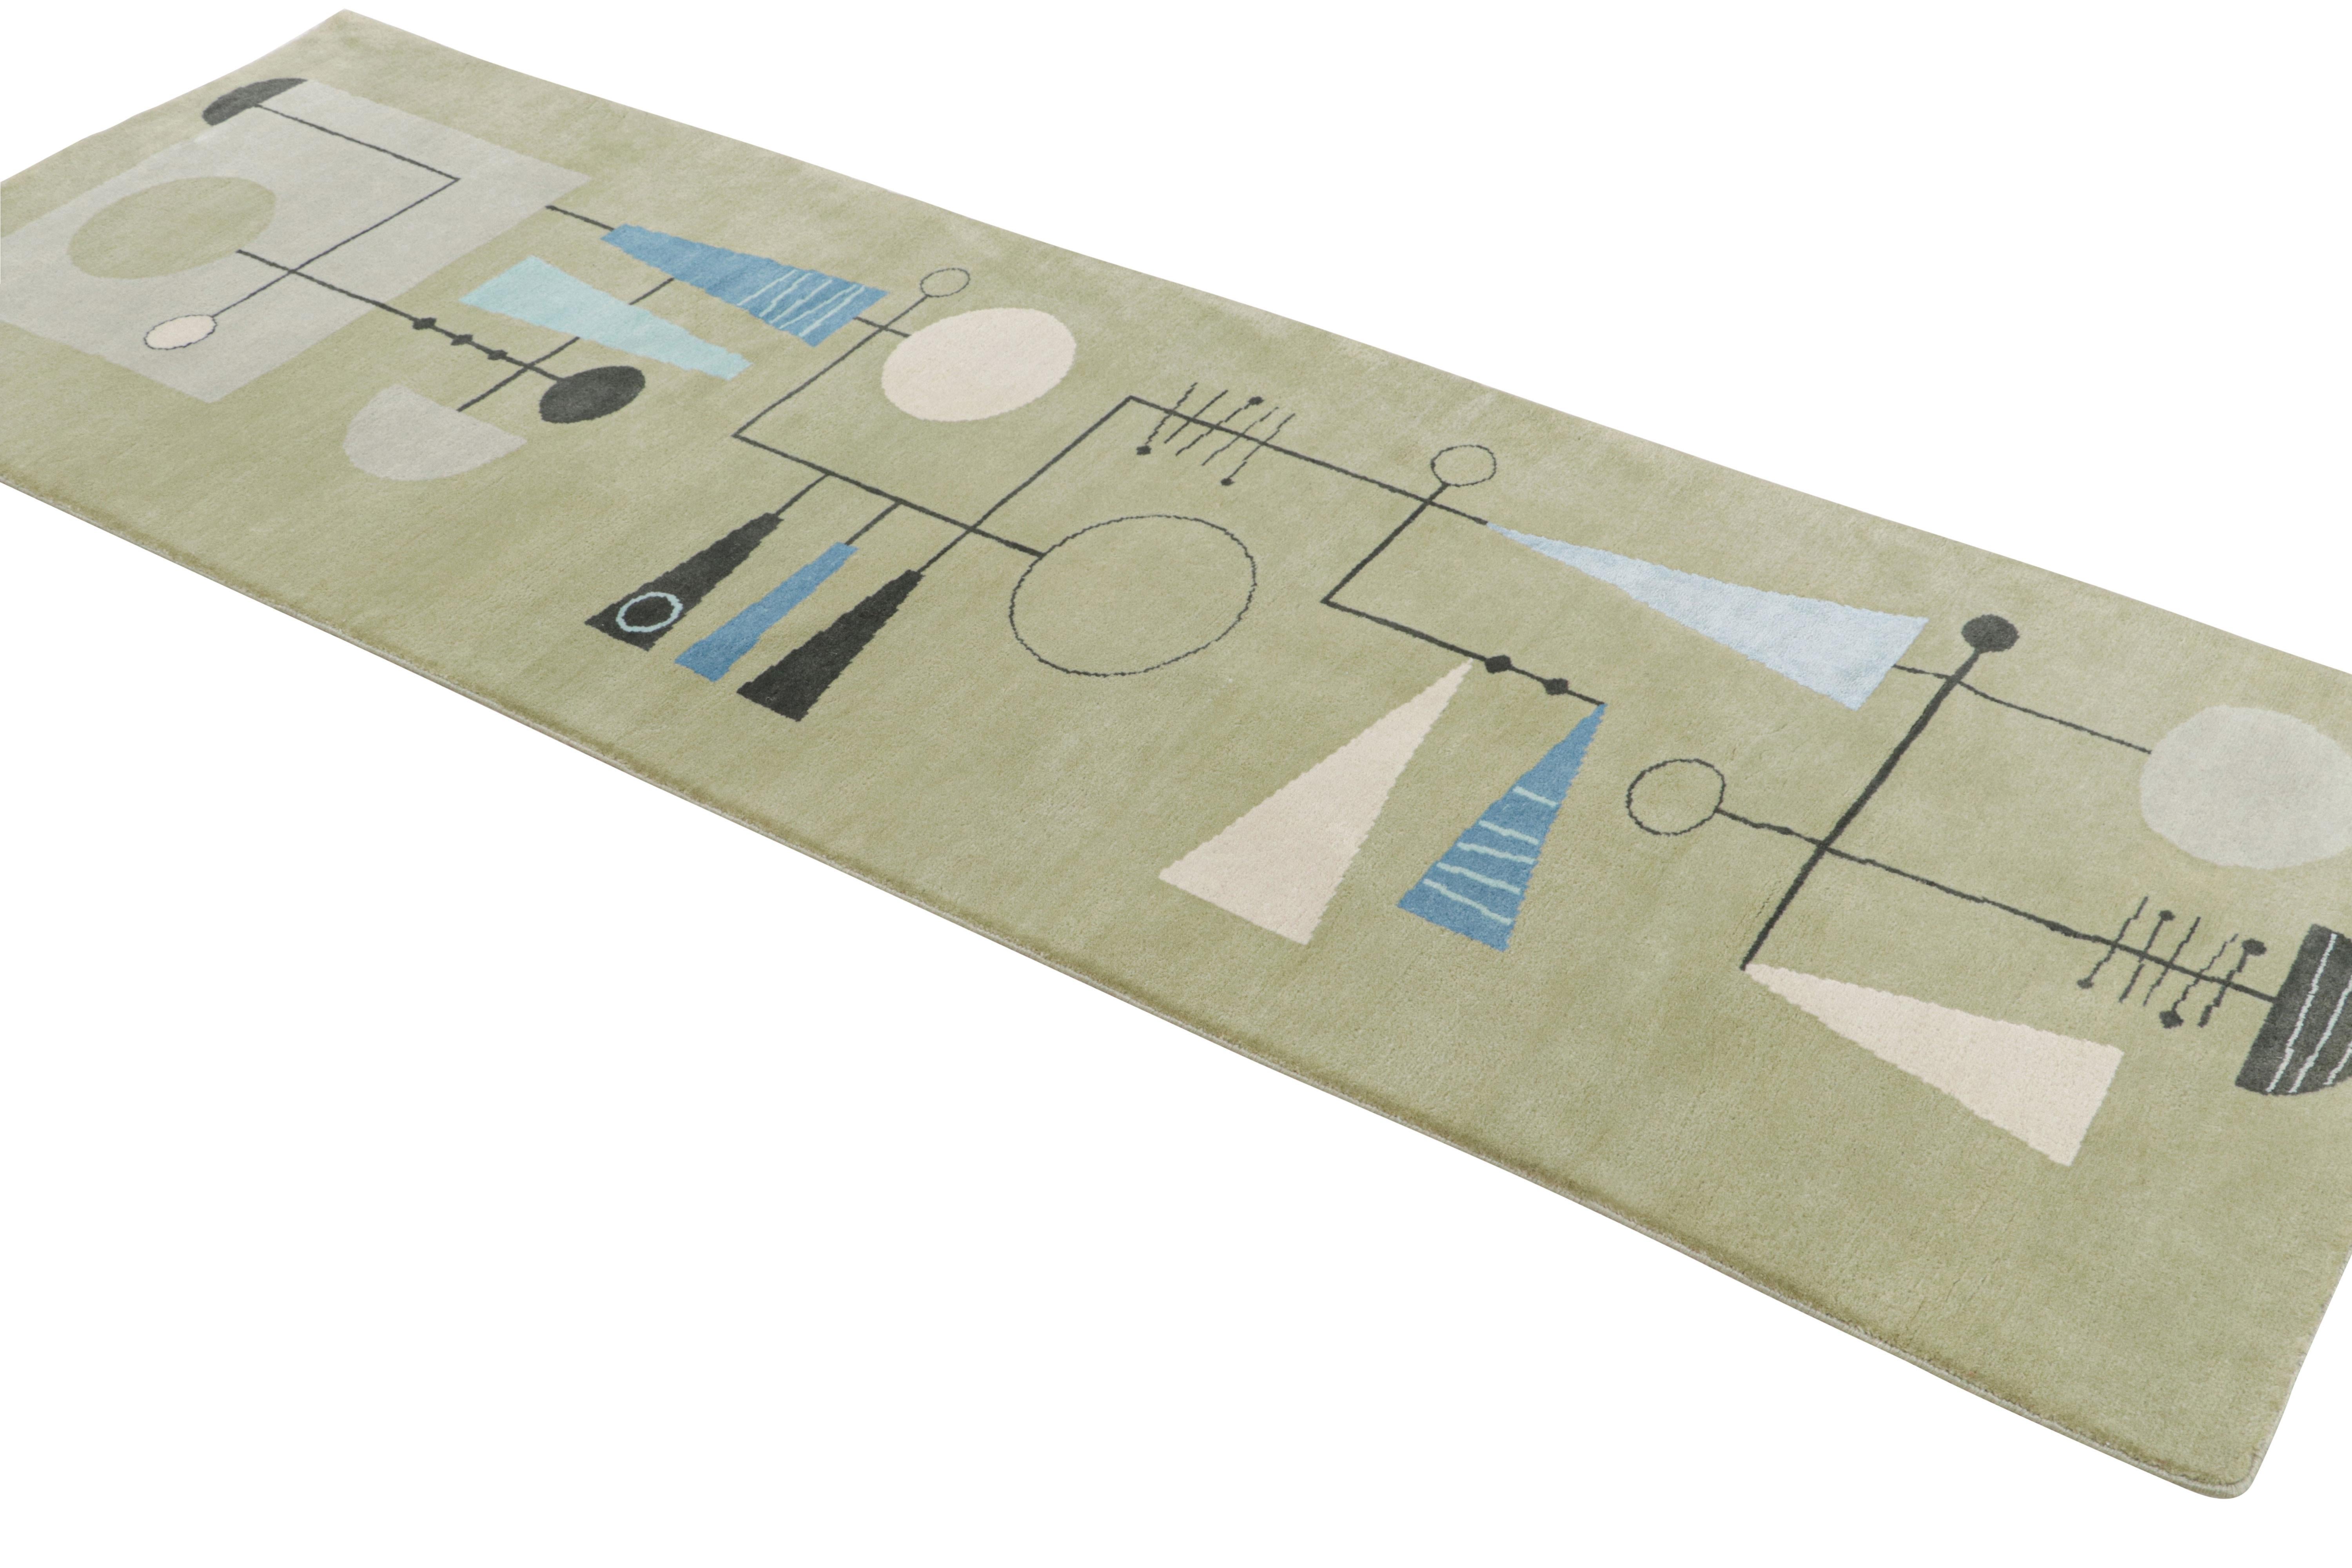 Hand-knotted in wool, this 3x8 mid-century modern runner rug designed in collaboration with El Gato, draws on atomic age sensibilities of the mid-20th century. 


On the Design: 

Connoisseurs may admire this mid-century modern runner rug in pista